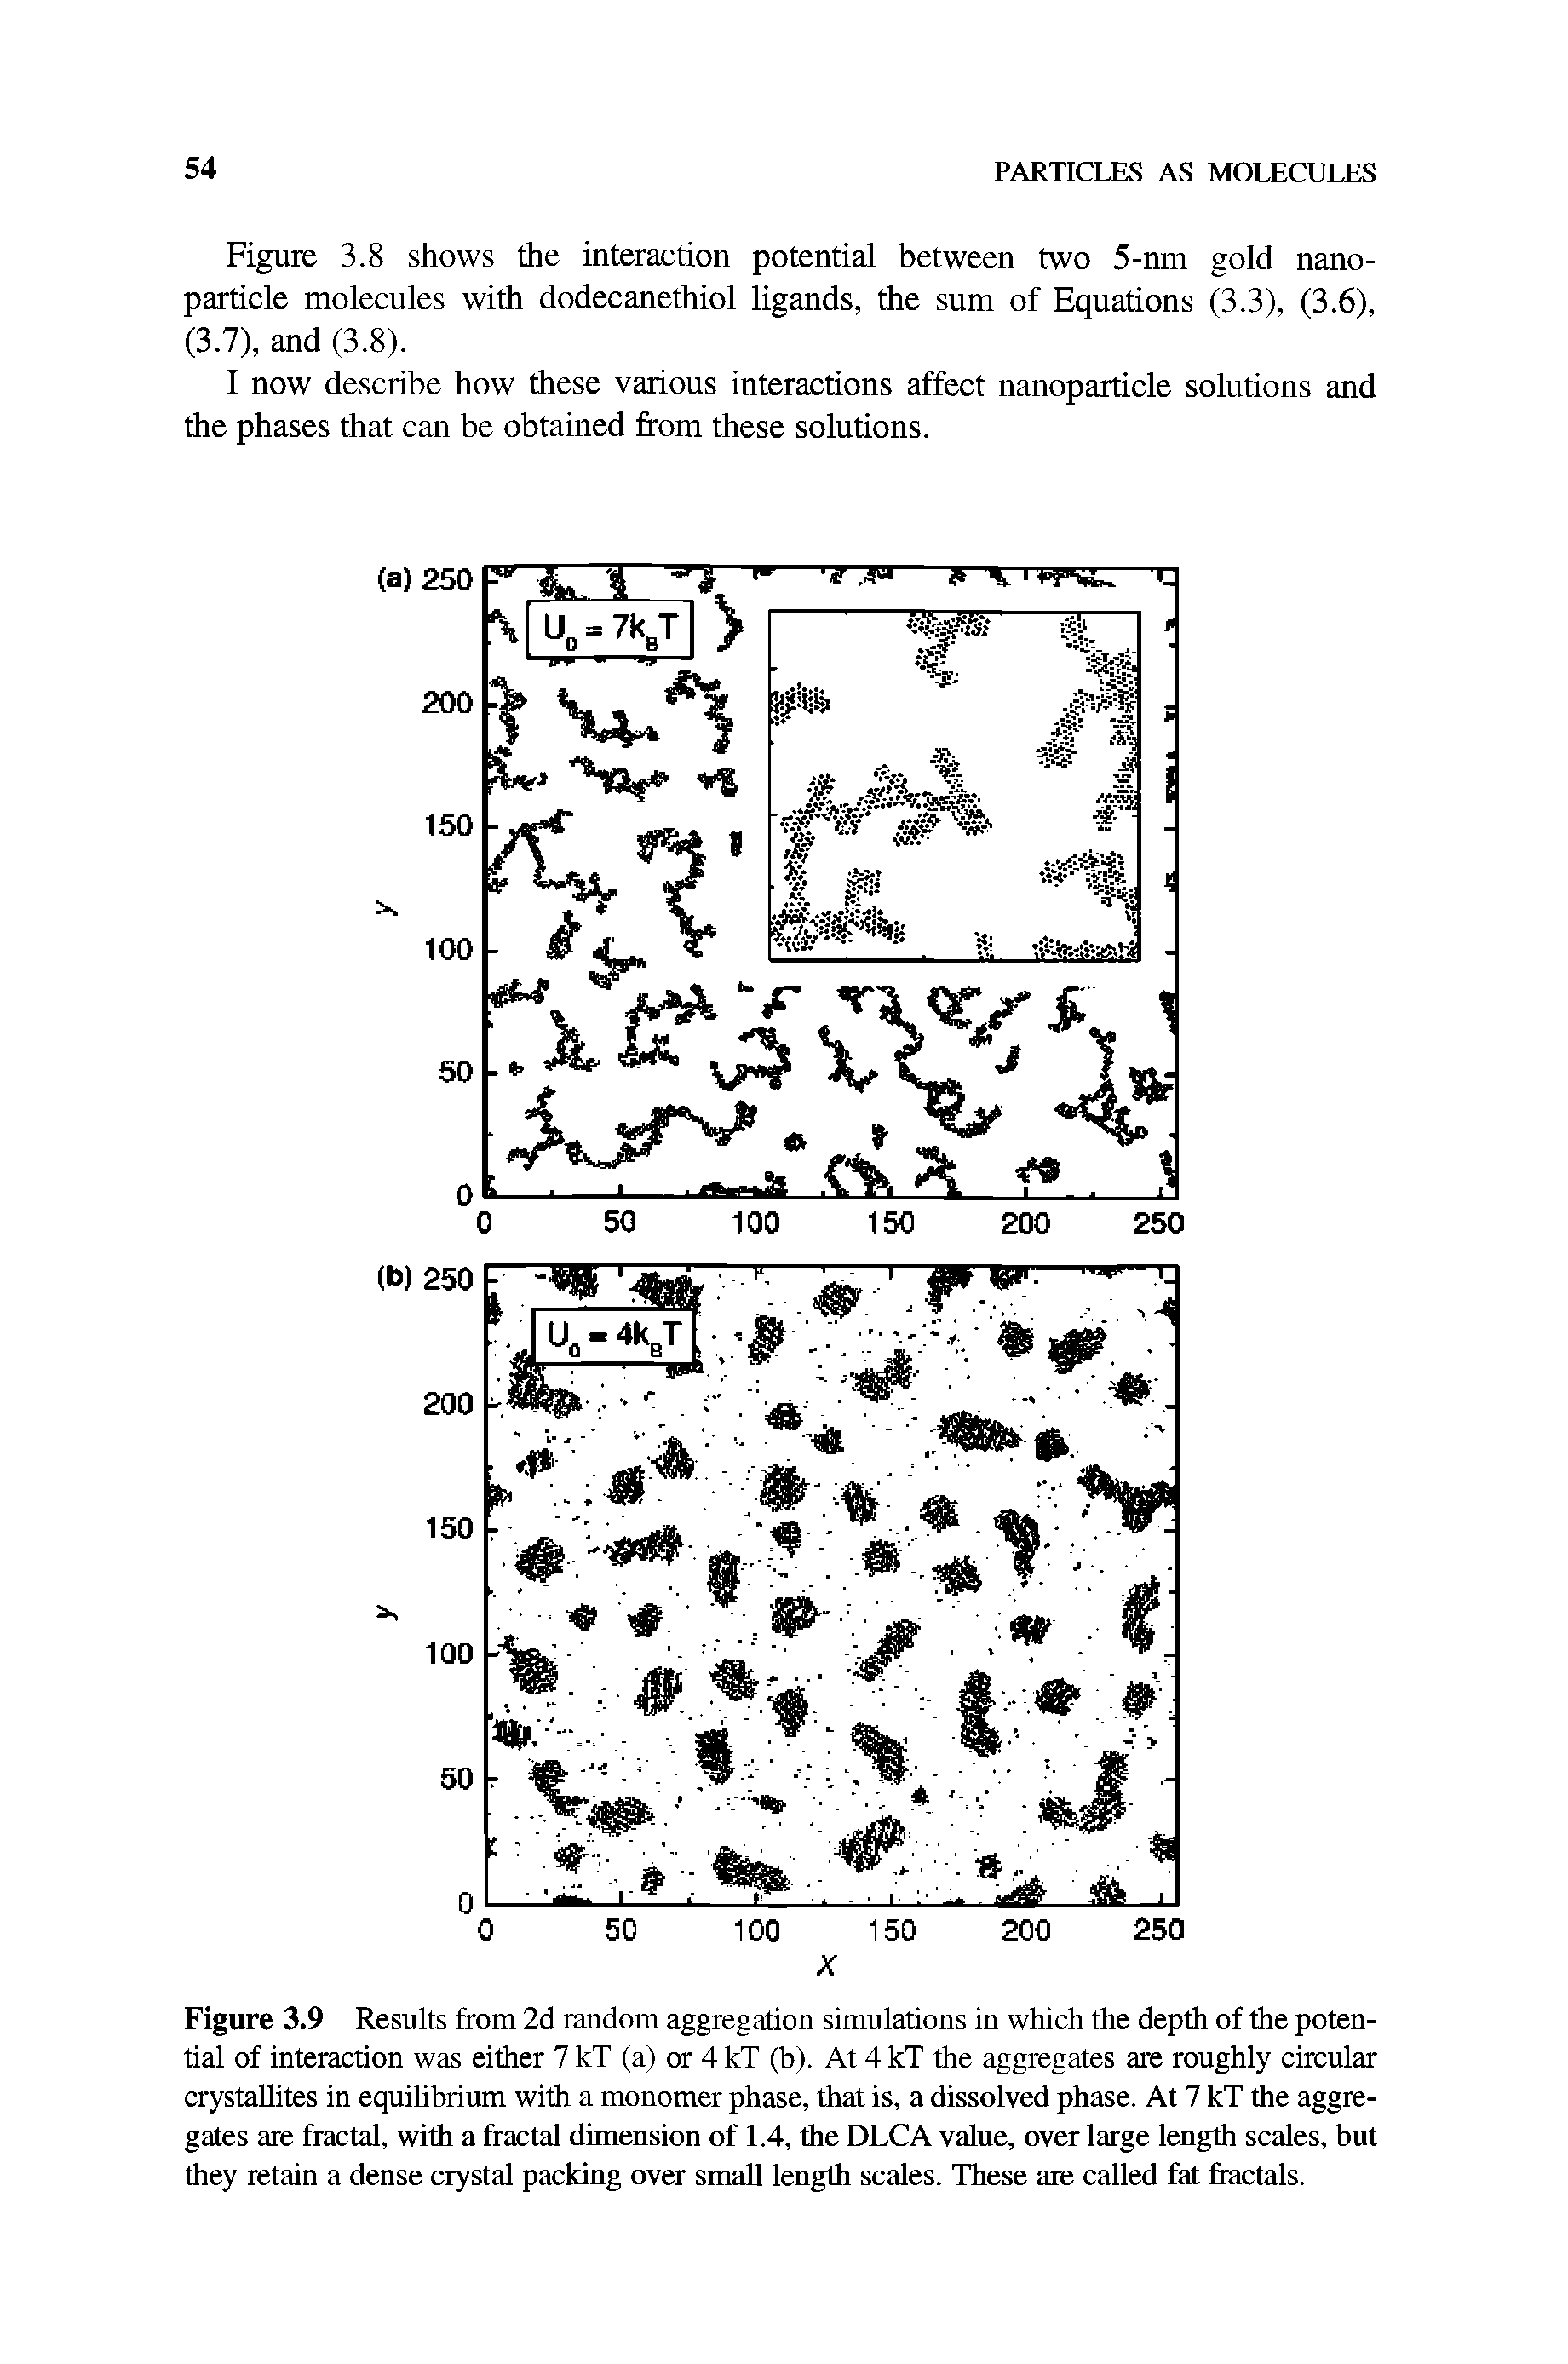 Figure 3.9 Results from 2d random aggregation simulations in which the depth of the potential of interaction was either 7 kT (a) or 4 kT (h). At 4 kT the aggregates are roughly circular crystallites in equilibrium with a monomer phase, that is, a dissolved phase. At 7 kT the aggregates are fractal, with a fractal dimension of 1.4, the DLCA value, over large length scales, but they retain a dense crystal packing over small length scales. These are called fat fractals.